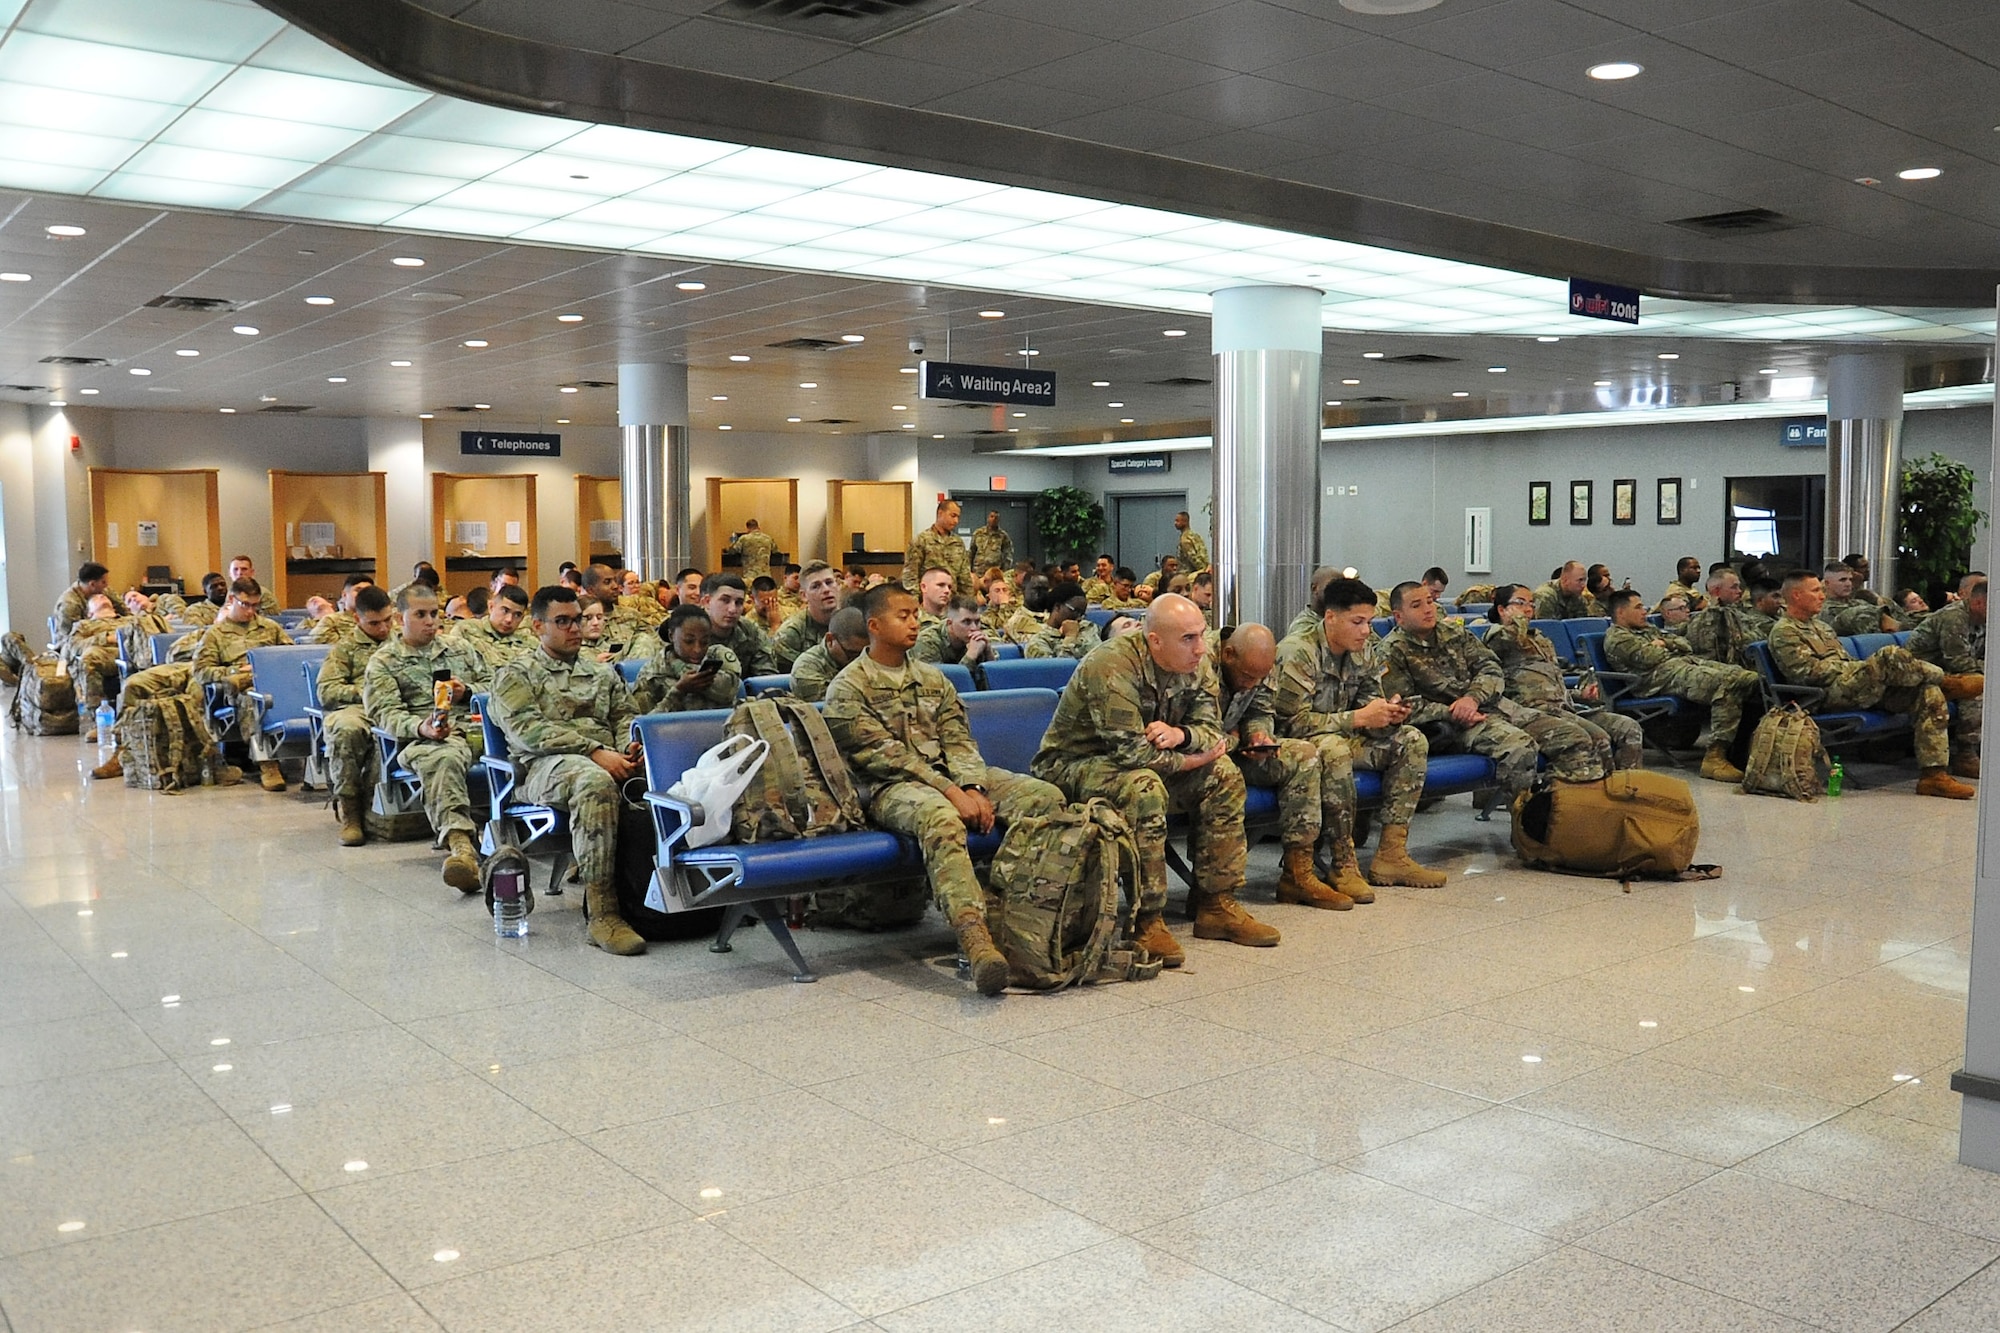 U.S. Soldiers assigned to various units under the 25th Infantry Division wait to board a Korean Air Boeing 777 aircraft at Osan Air Base, Republic of Korea May 4, 2018. The Soldiers boarded the plane as part of the Mutual Airlift Support Agreement exercise for the first time at Osan Air Base to test interoperability and procedures between the United States military, ROK Air Force and Korean Air Lines. (U.S. Air Force photo by Tech. Sgt. Ashley Tyler)